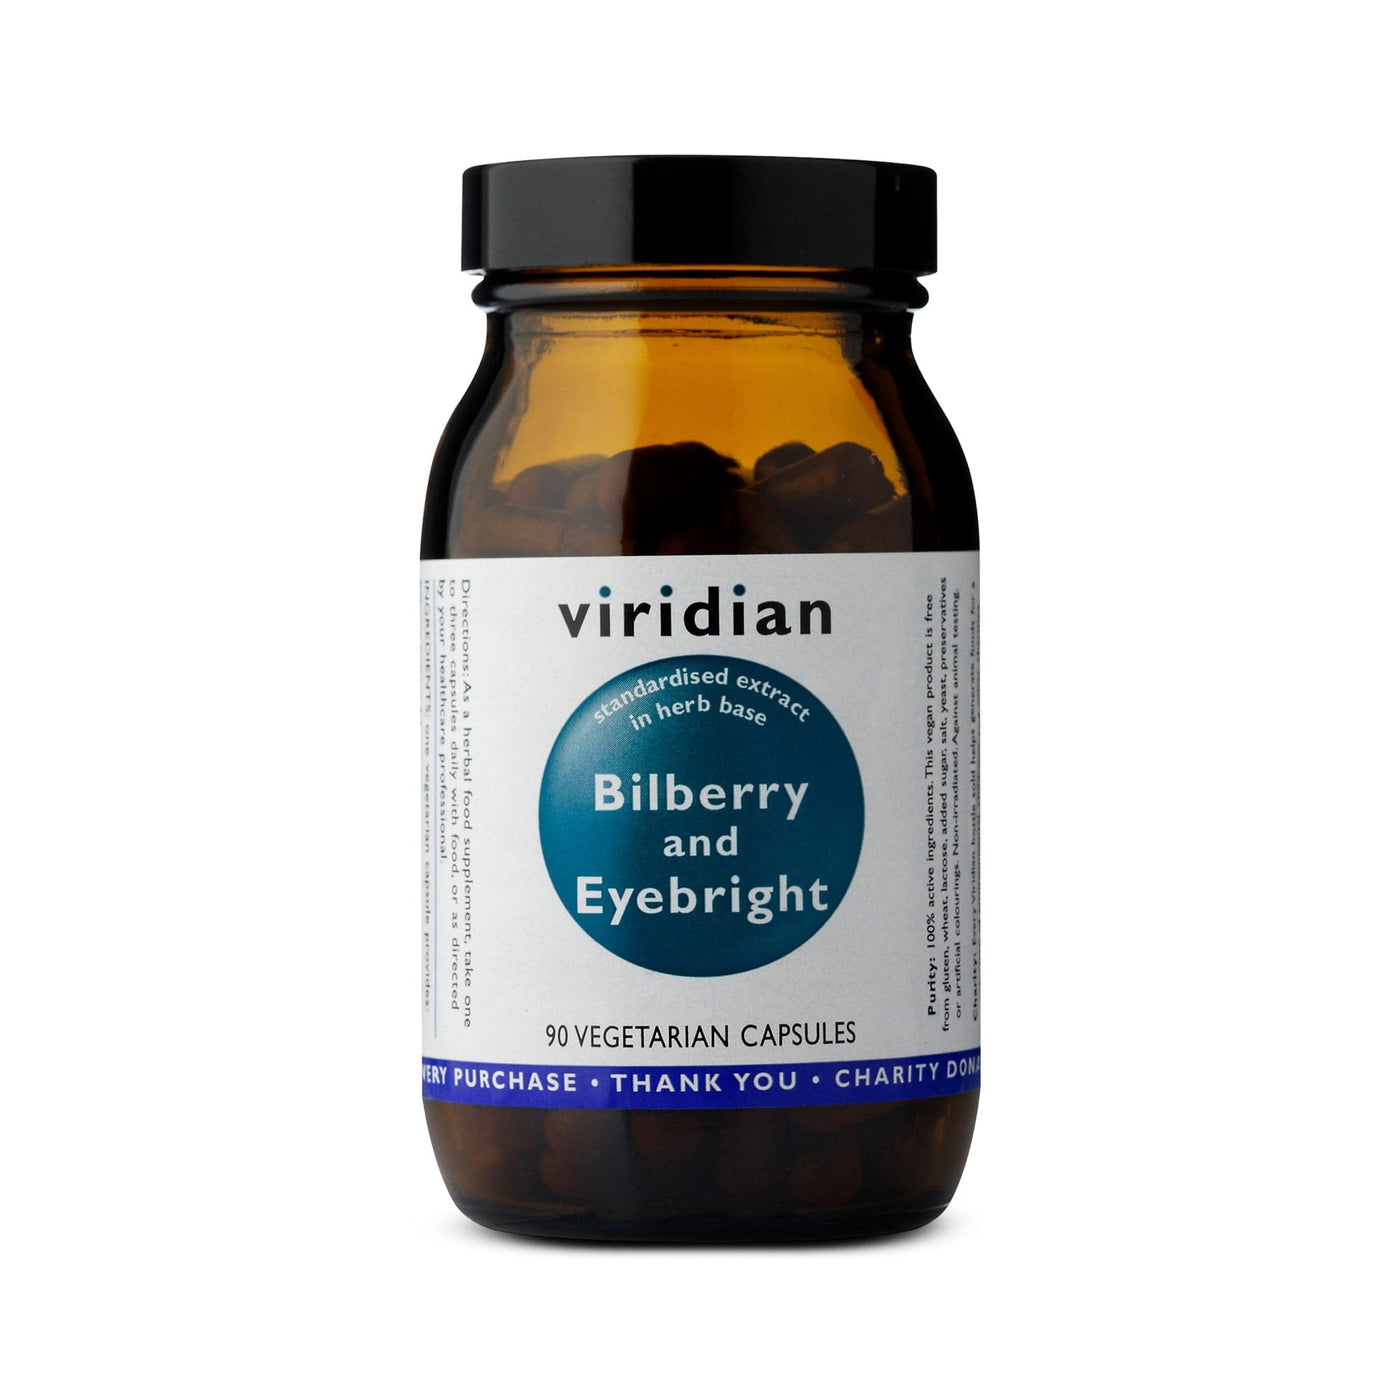 Neal's Yard Remedies Viridian Bilberry and Eyebright Extract - 90 Capsules